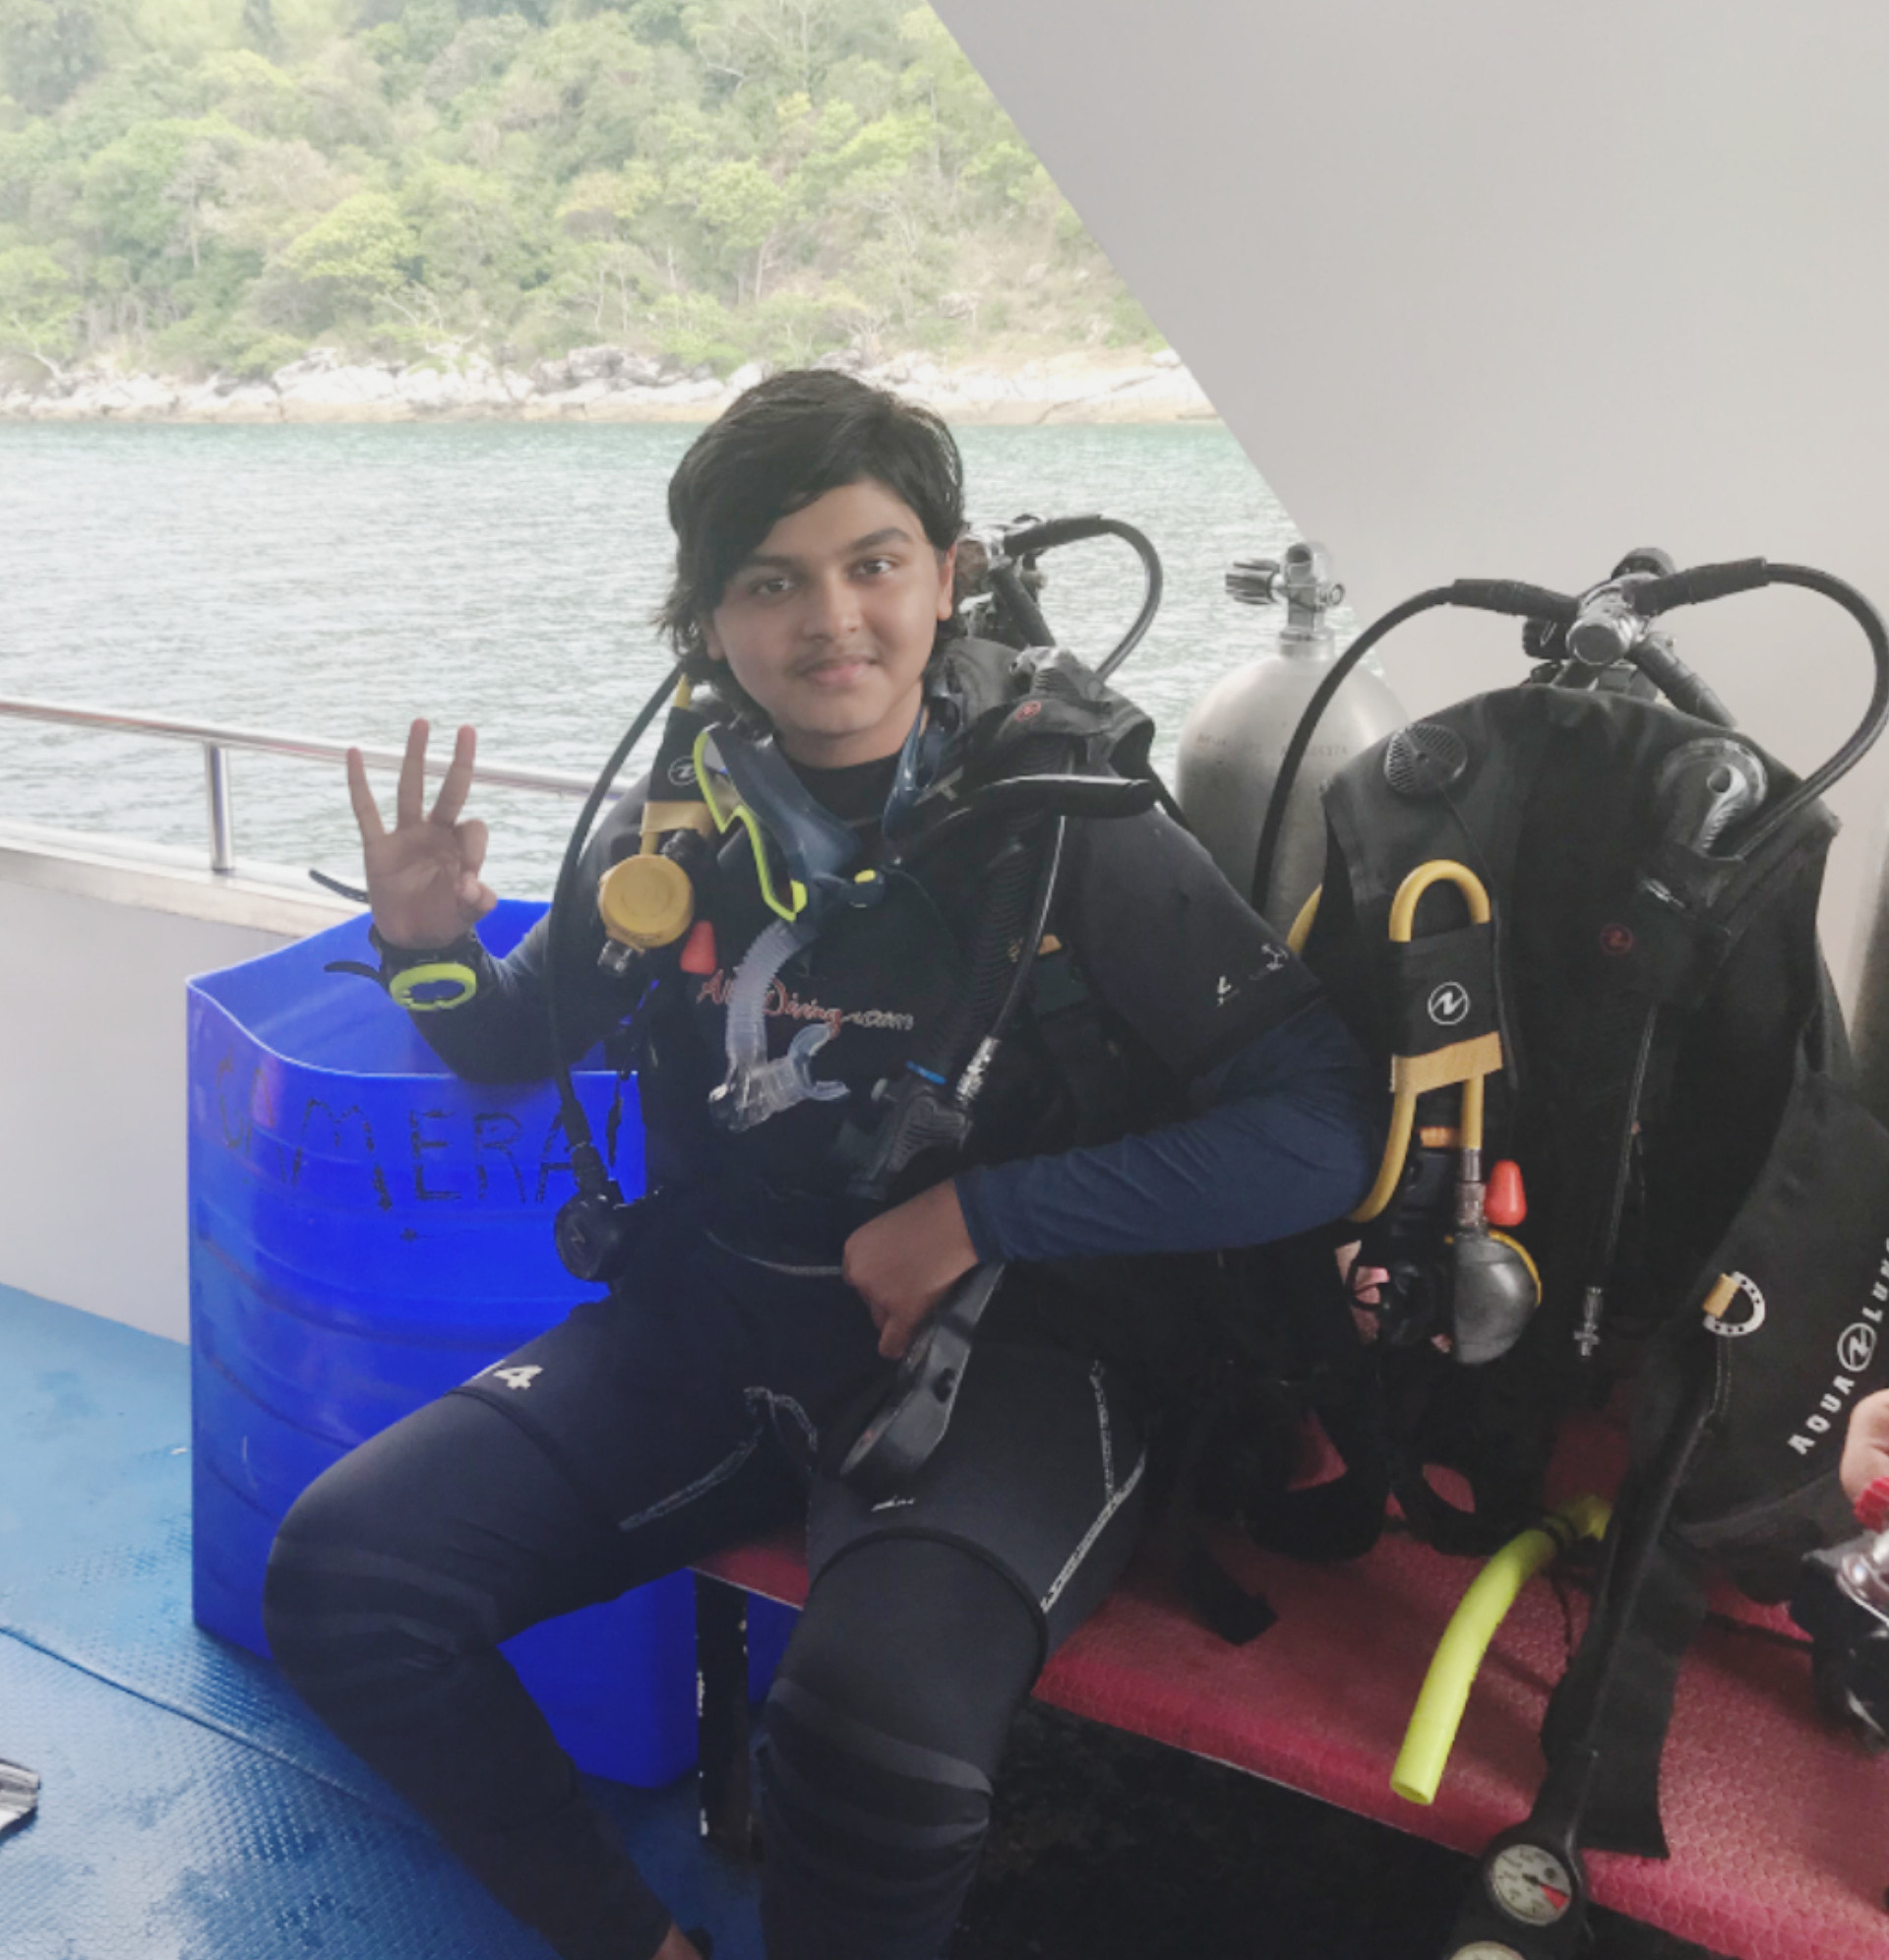 A diver waves to the camera while getting kitted up in gear.